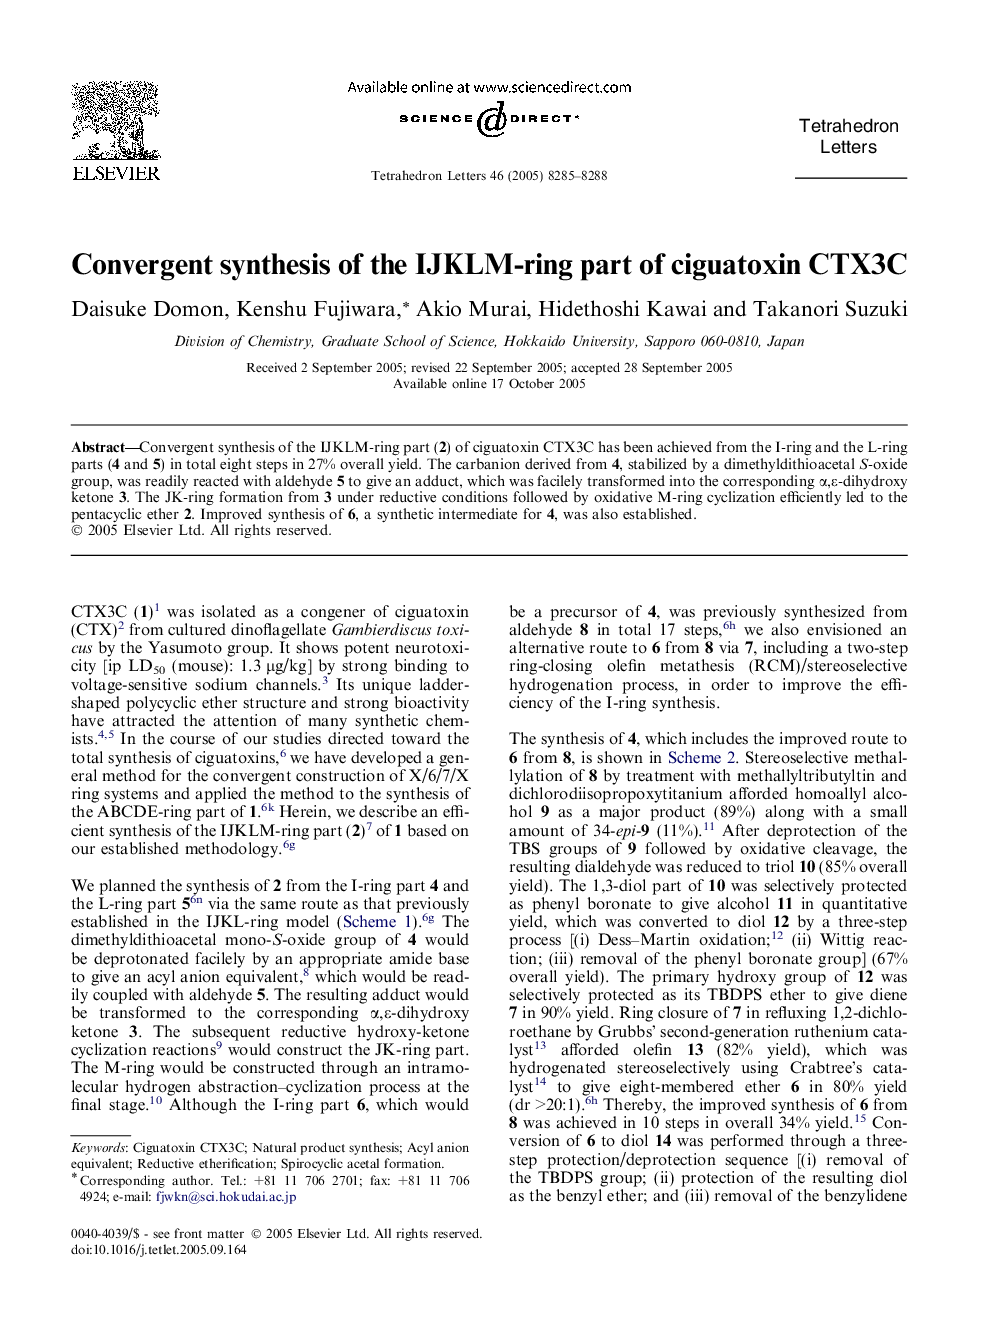 Convergent synthesis of the IJKLM-ring part of ciguatoxin CTX3C